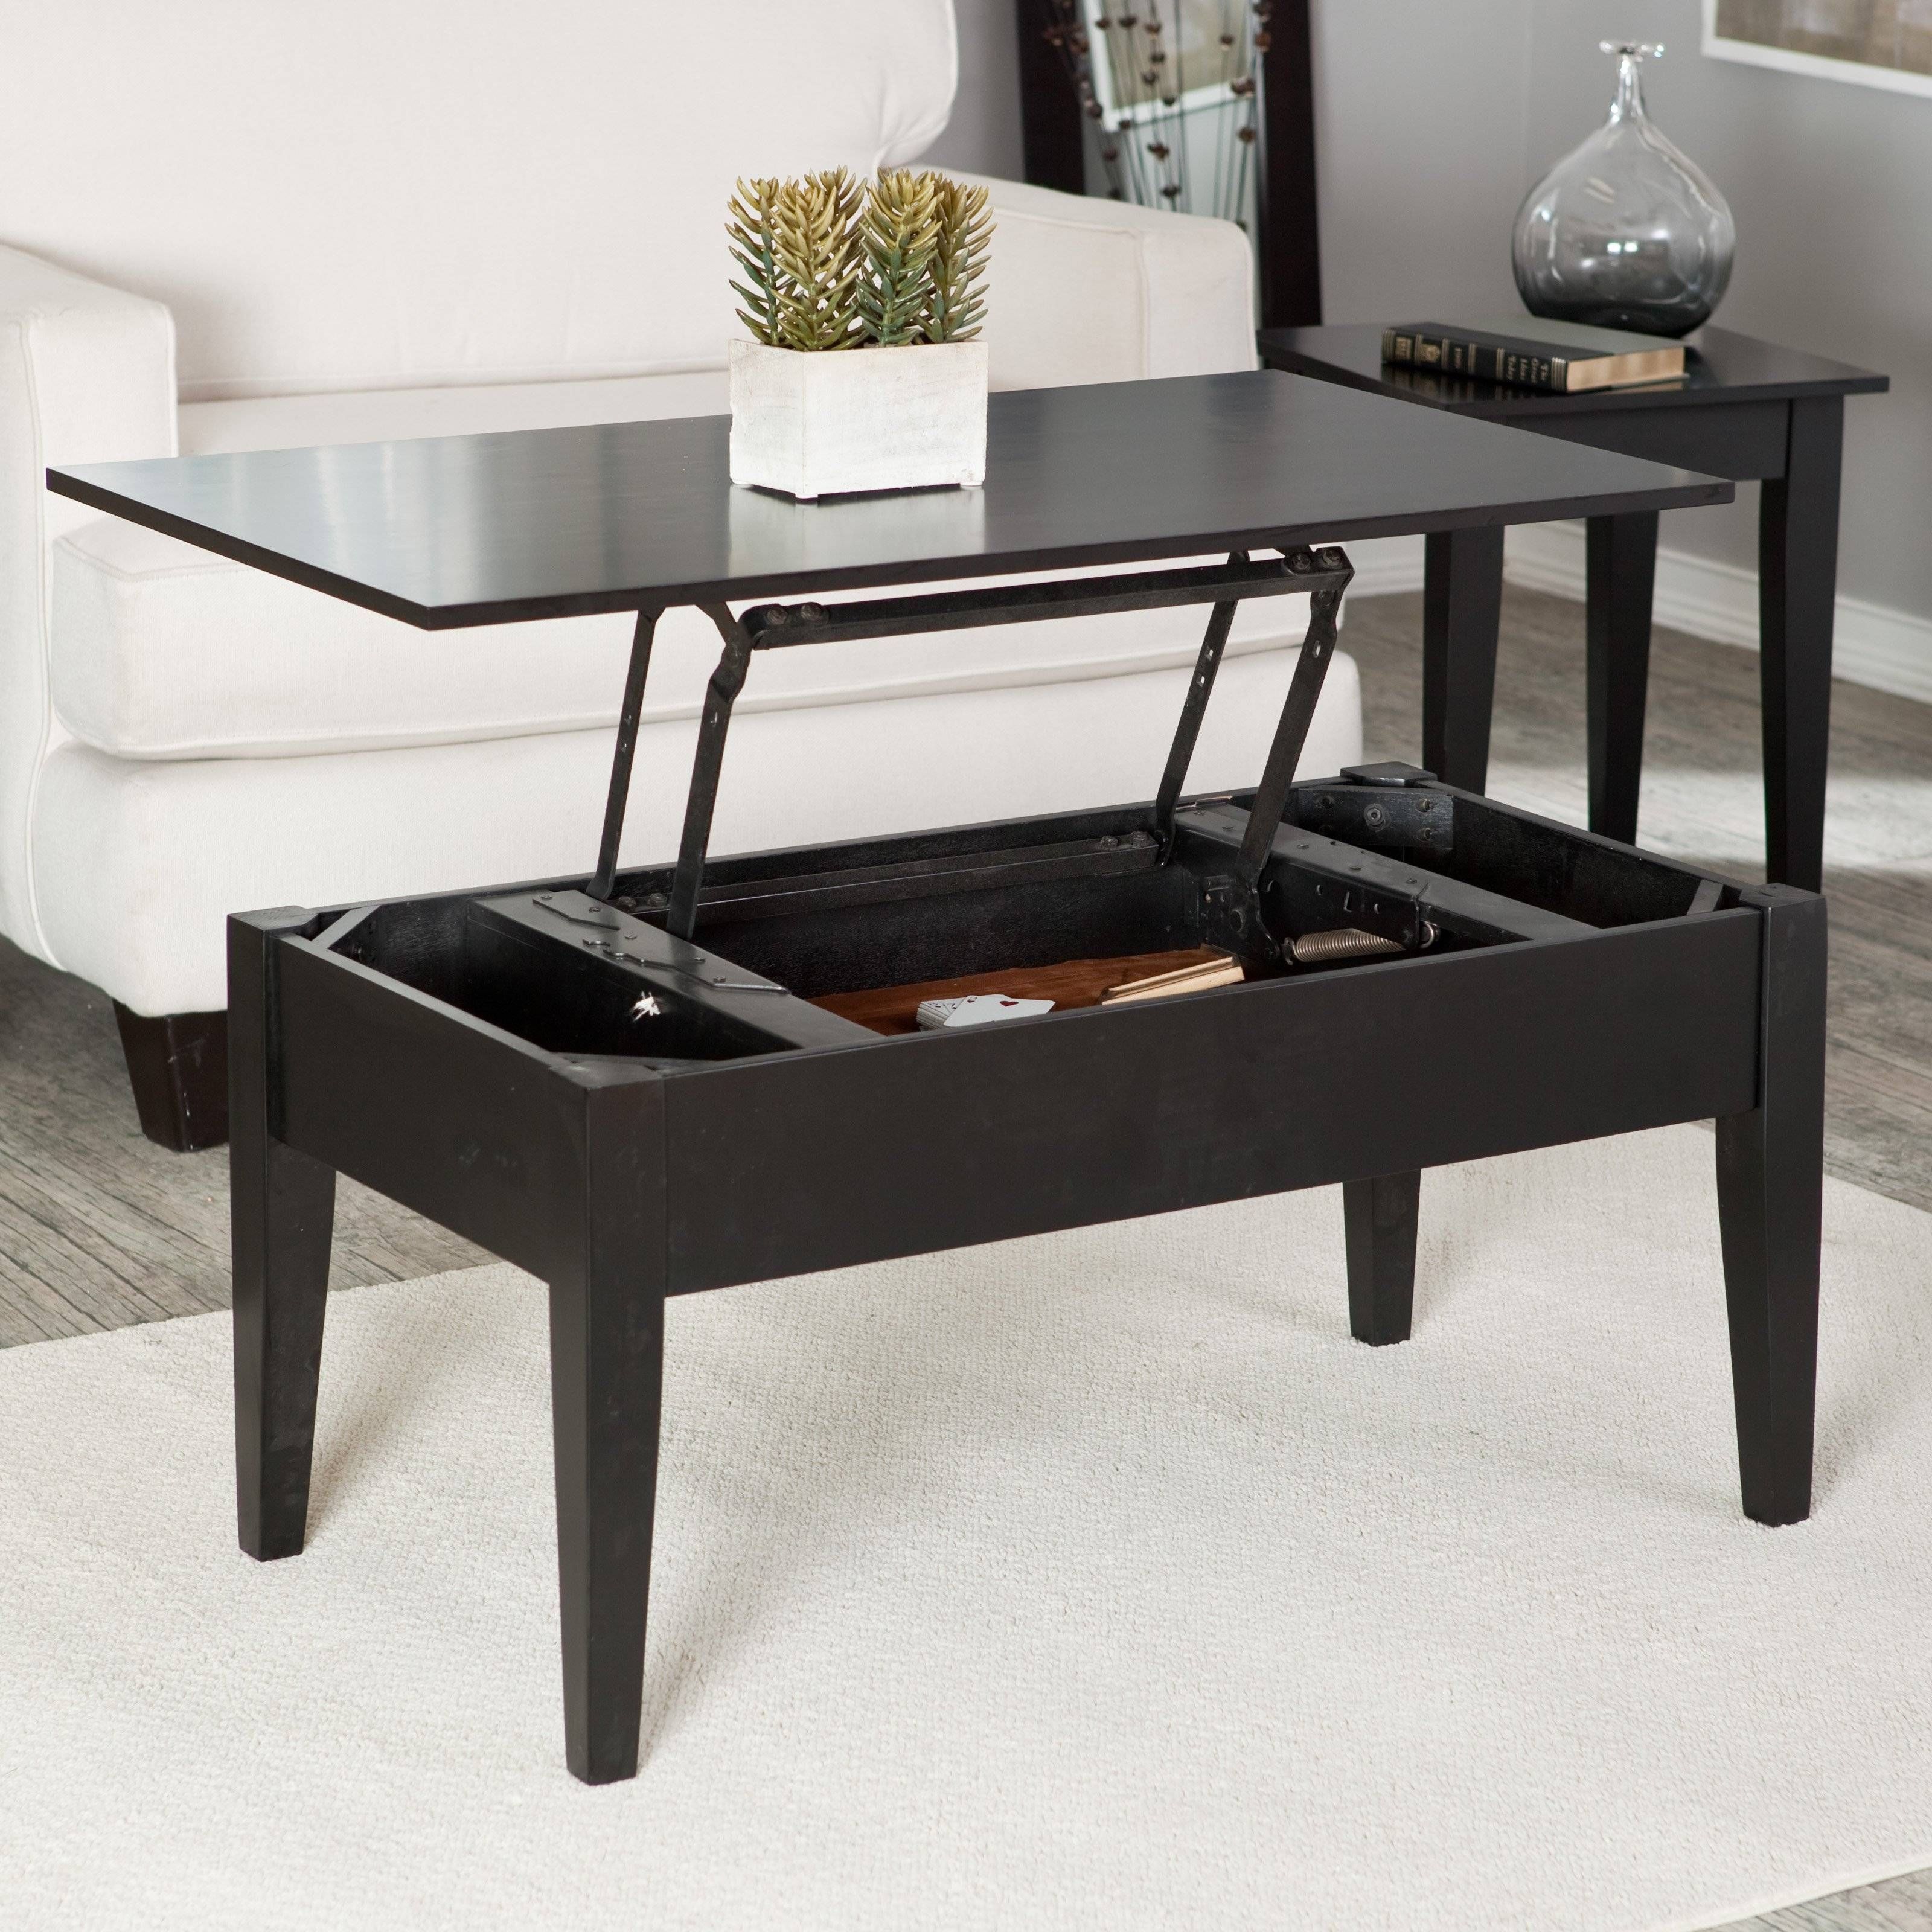 Turner Lift Top Coffee Table – Black – Walmart For Black Coffee Tables (View 4 of 30)